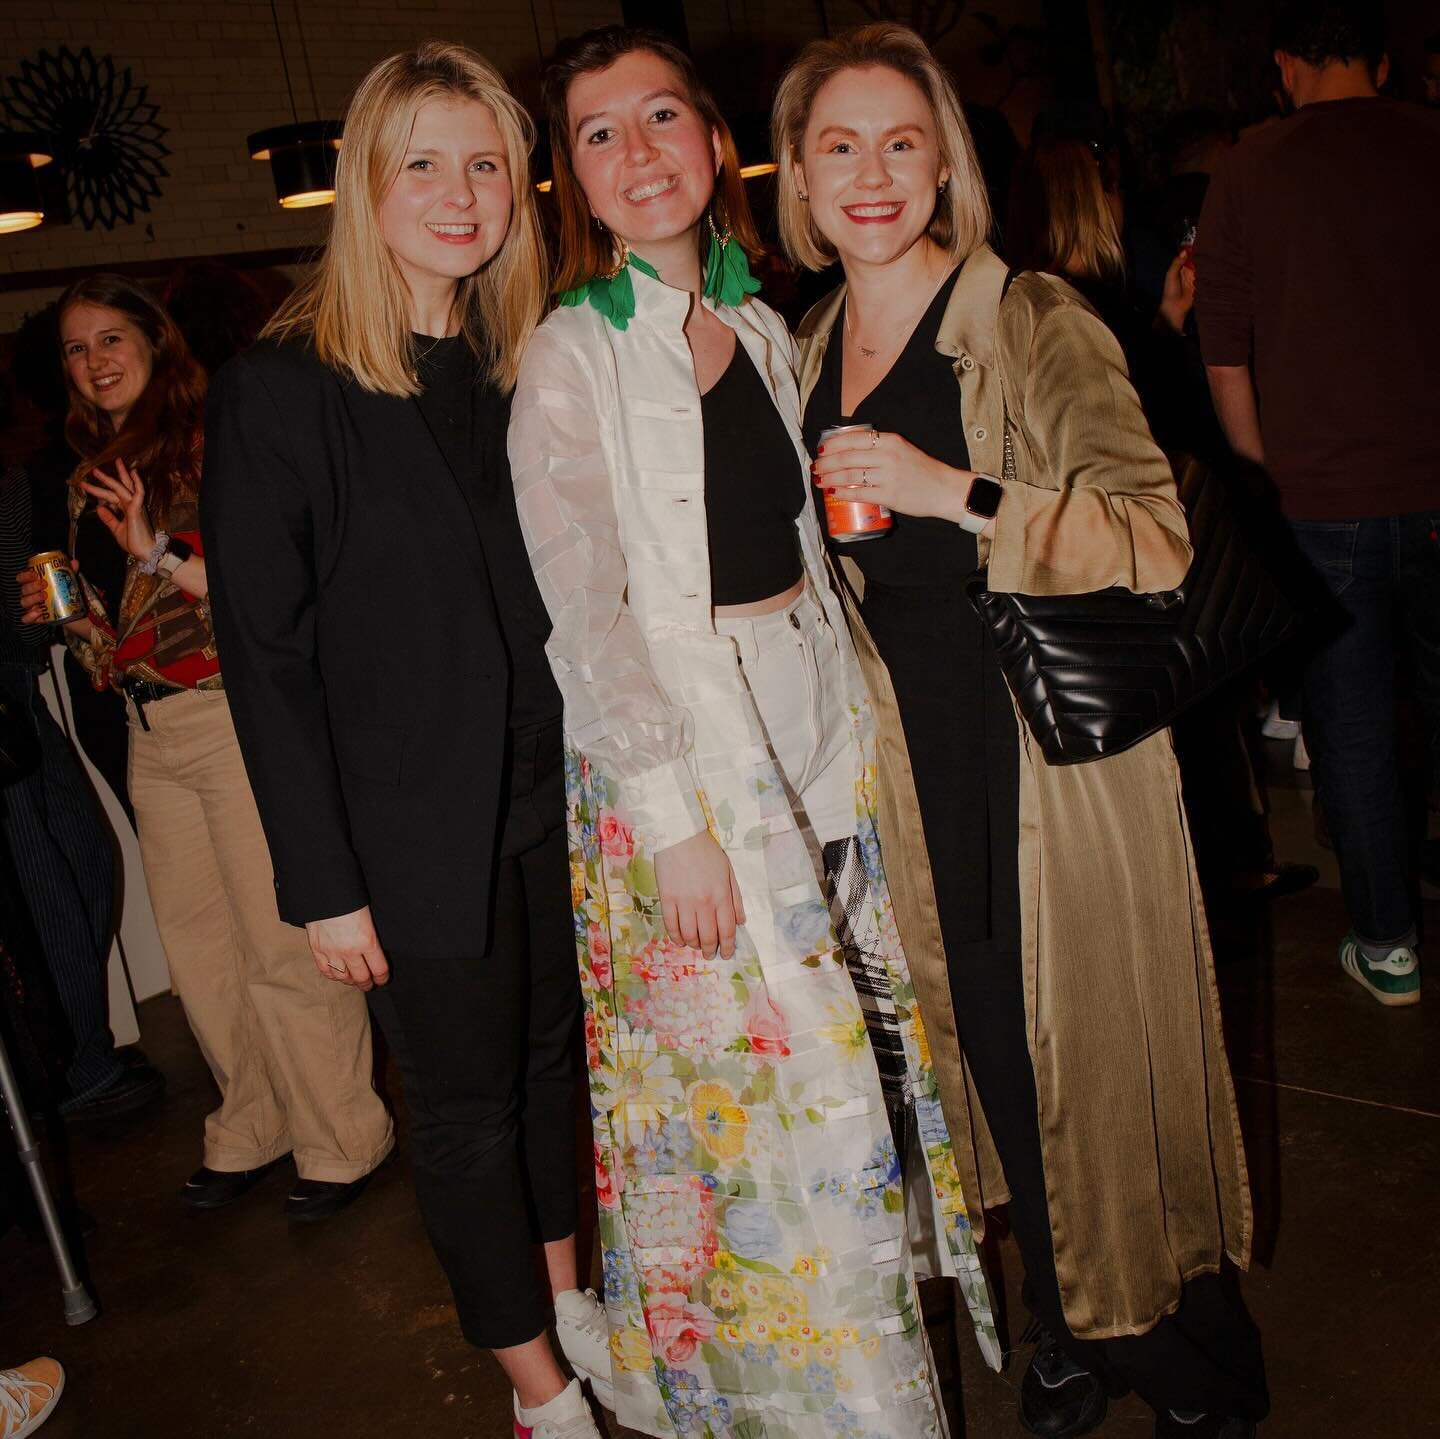 If you&rsquo;re interested in partnering with London Design Festival, please reach out directly to Bree, Lucy and I:
ldf.partners@londondesignfestival.com
-
Last month, inside the @vitra showroom, we brought the design community together to kick off 